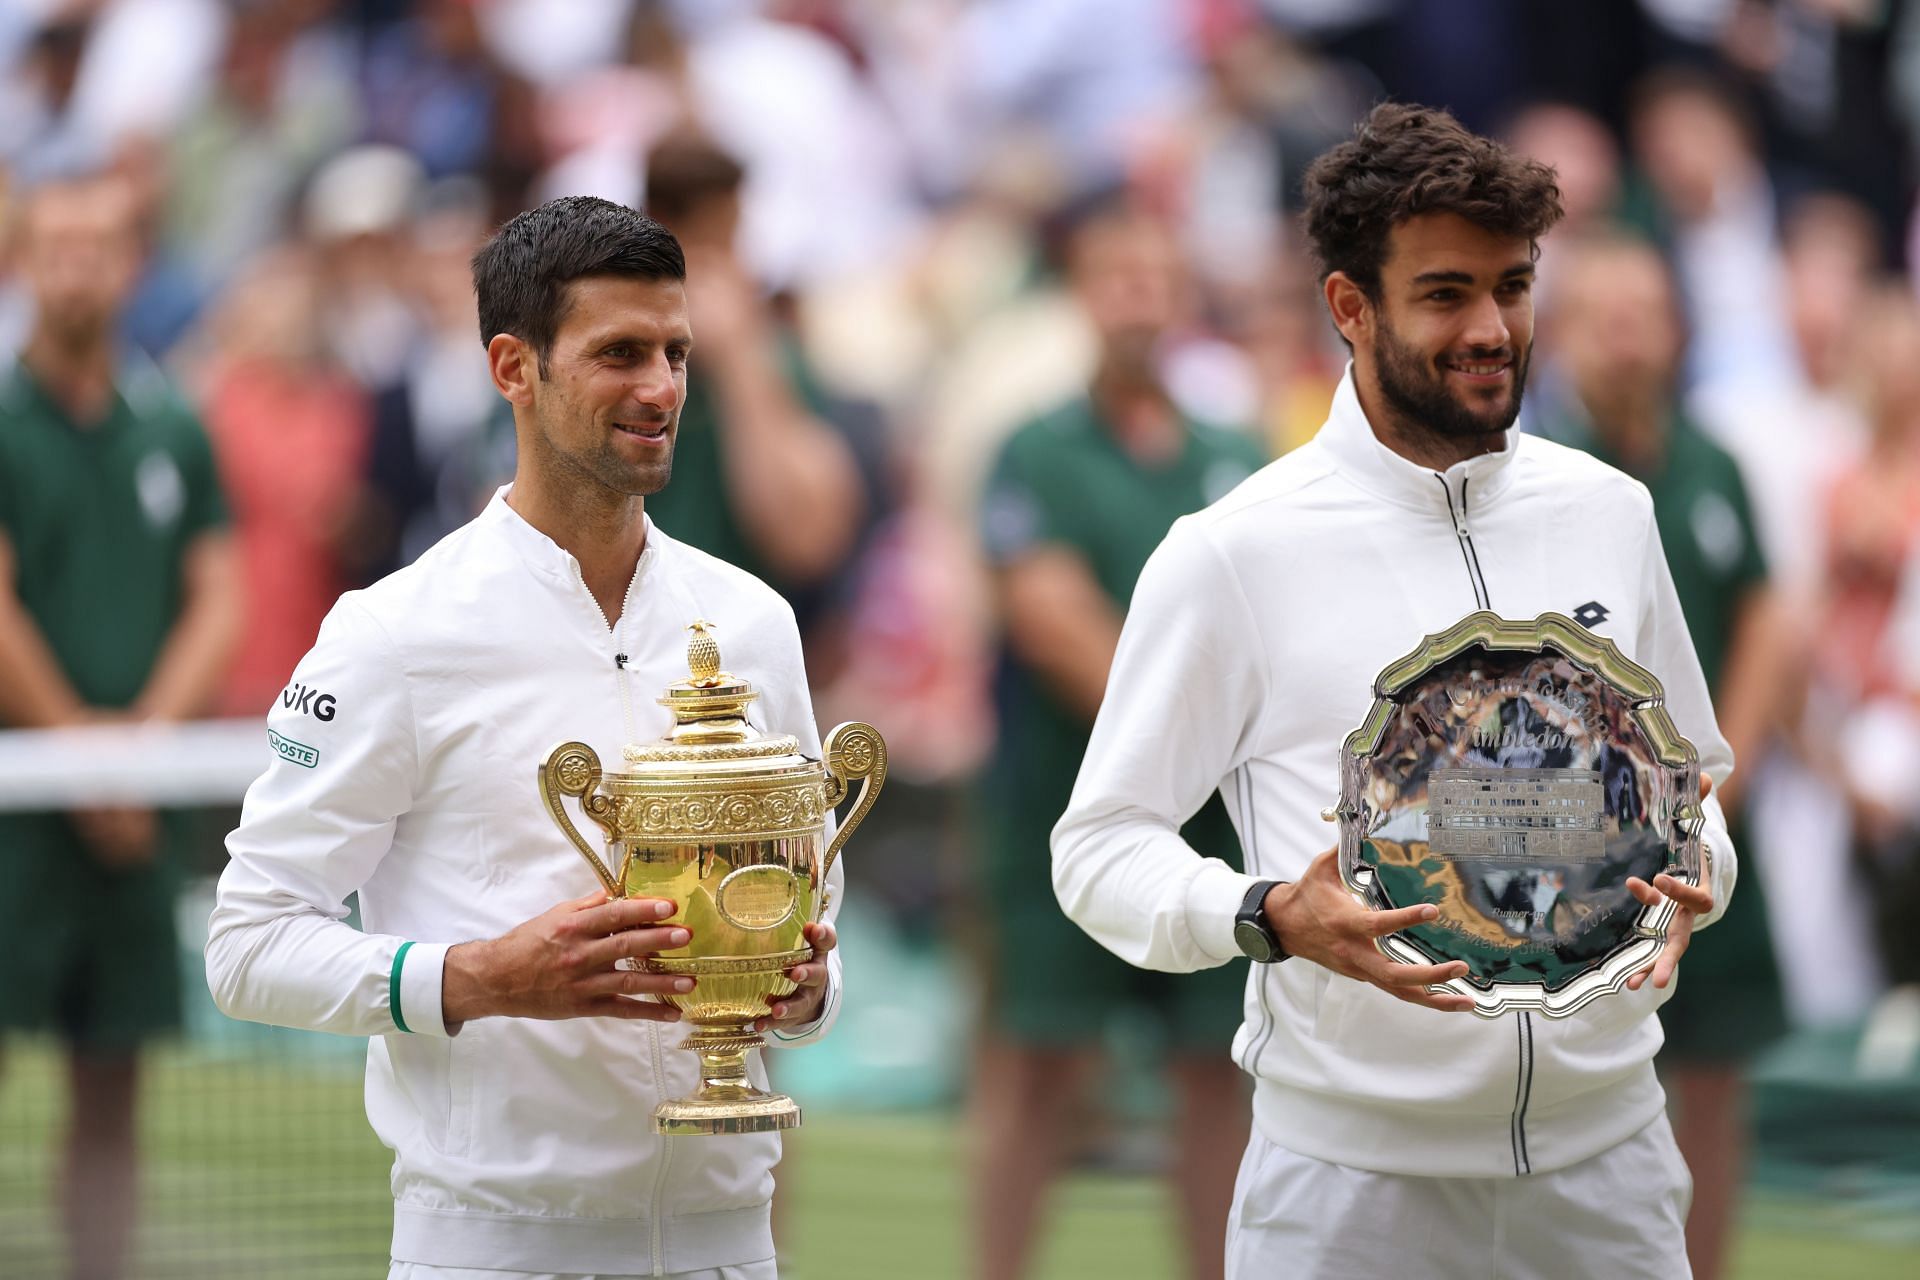 Matteo Berrettini (right) hopes to fare better if he reaches the Wimbledon final this year